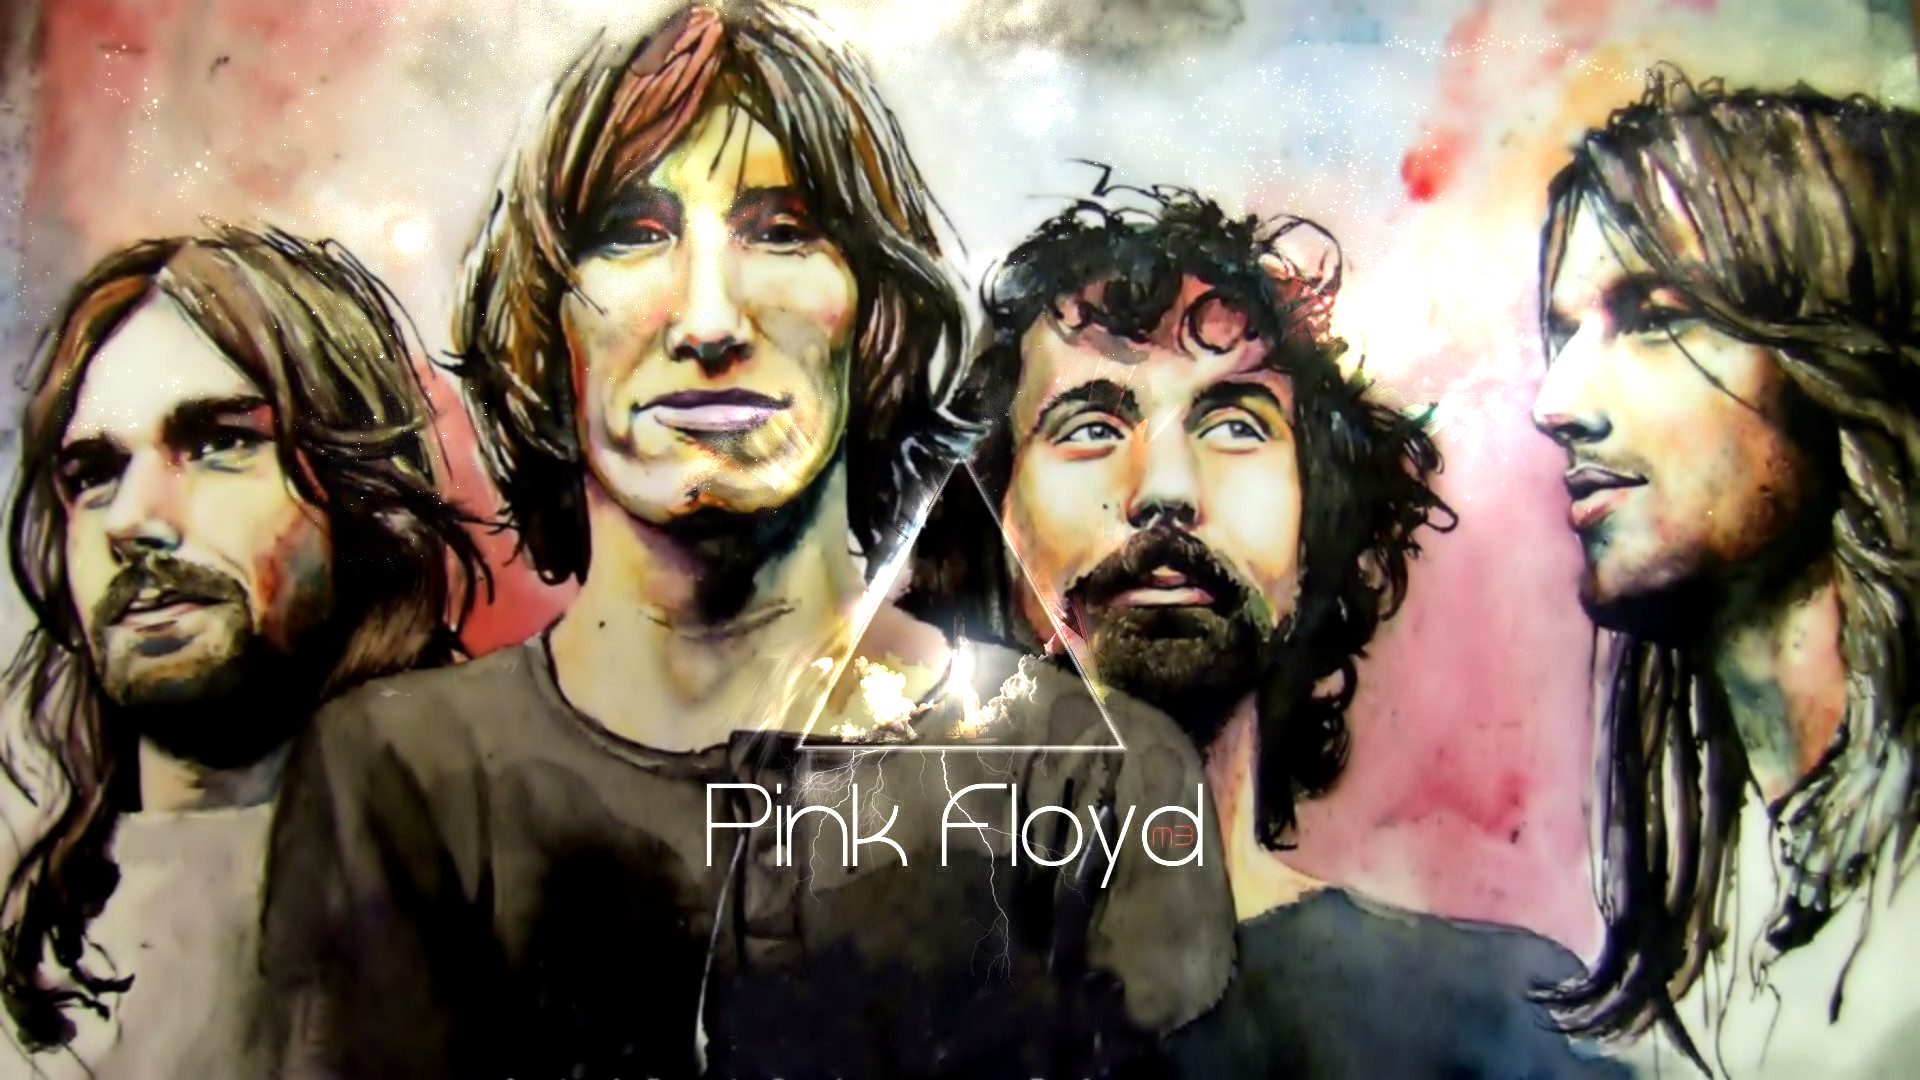 1920x1080 Pink Floyd Band Wallpapers.